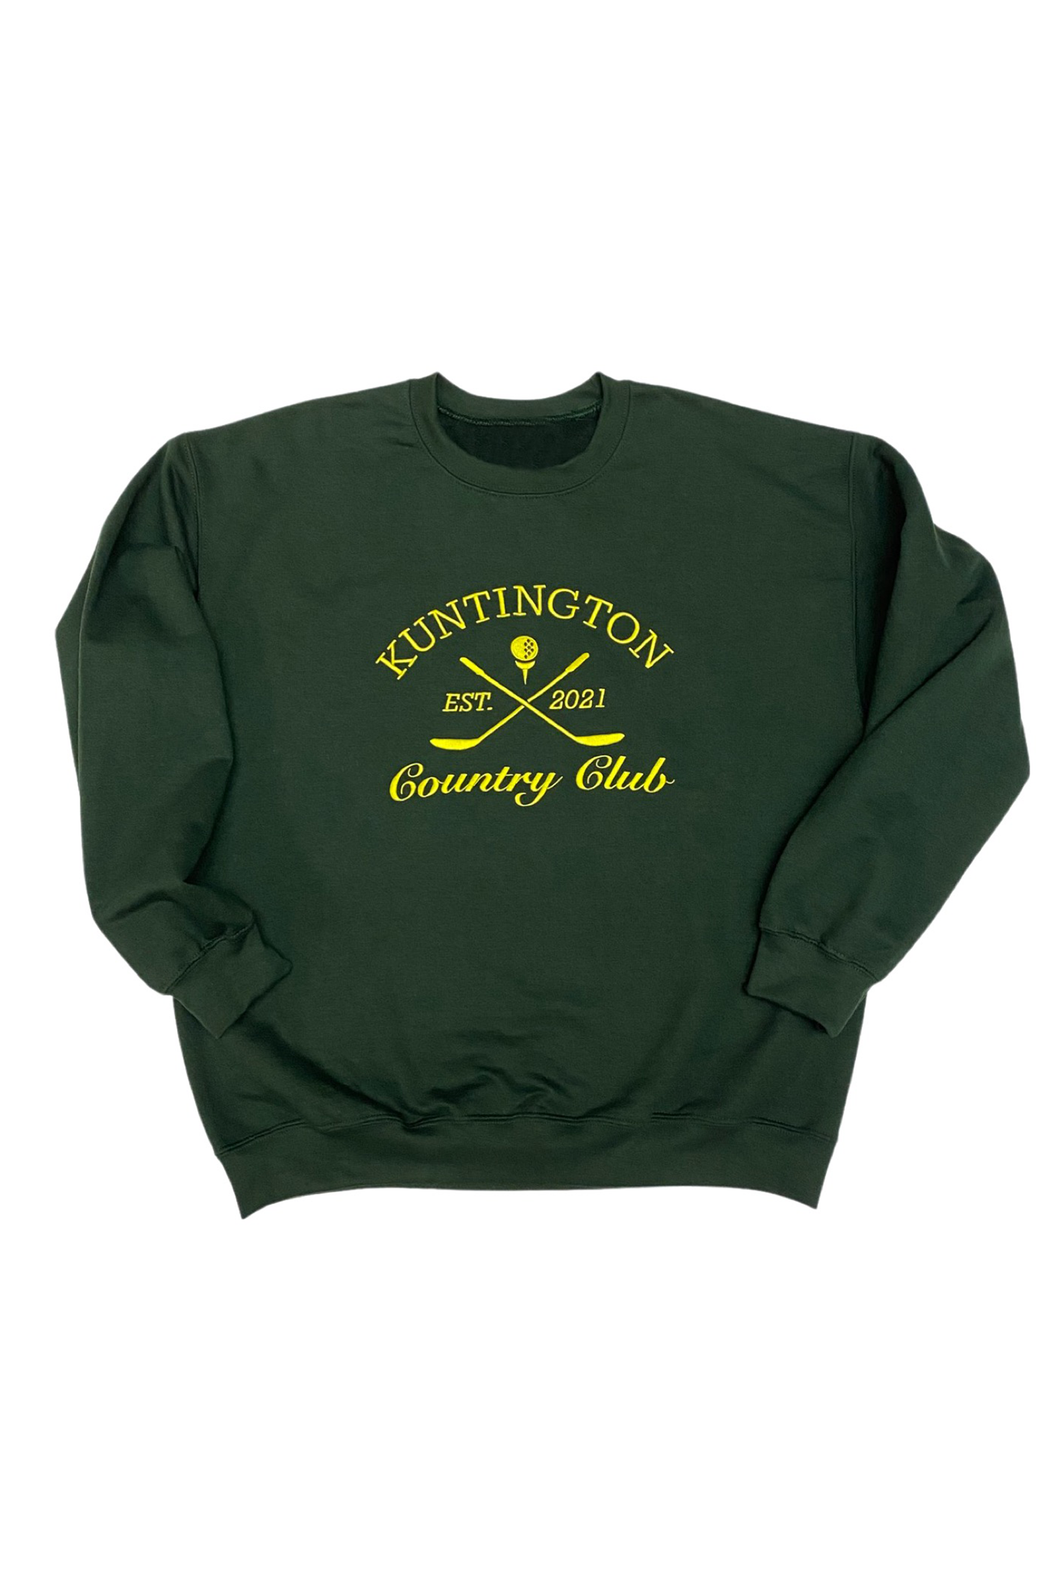 Kuntington Country Club Embroidered Crew